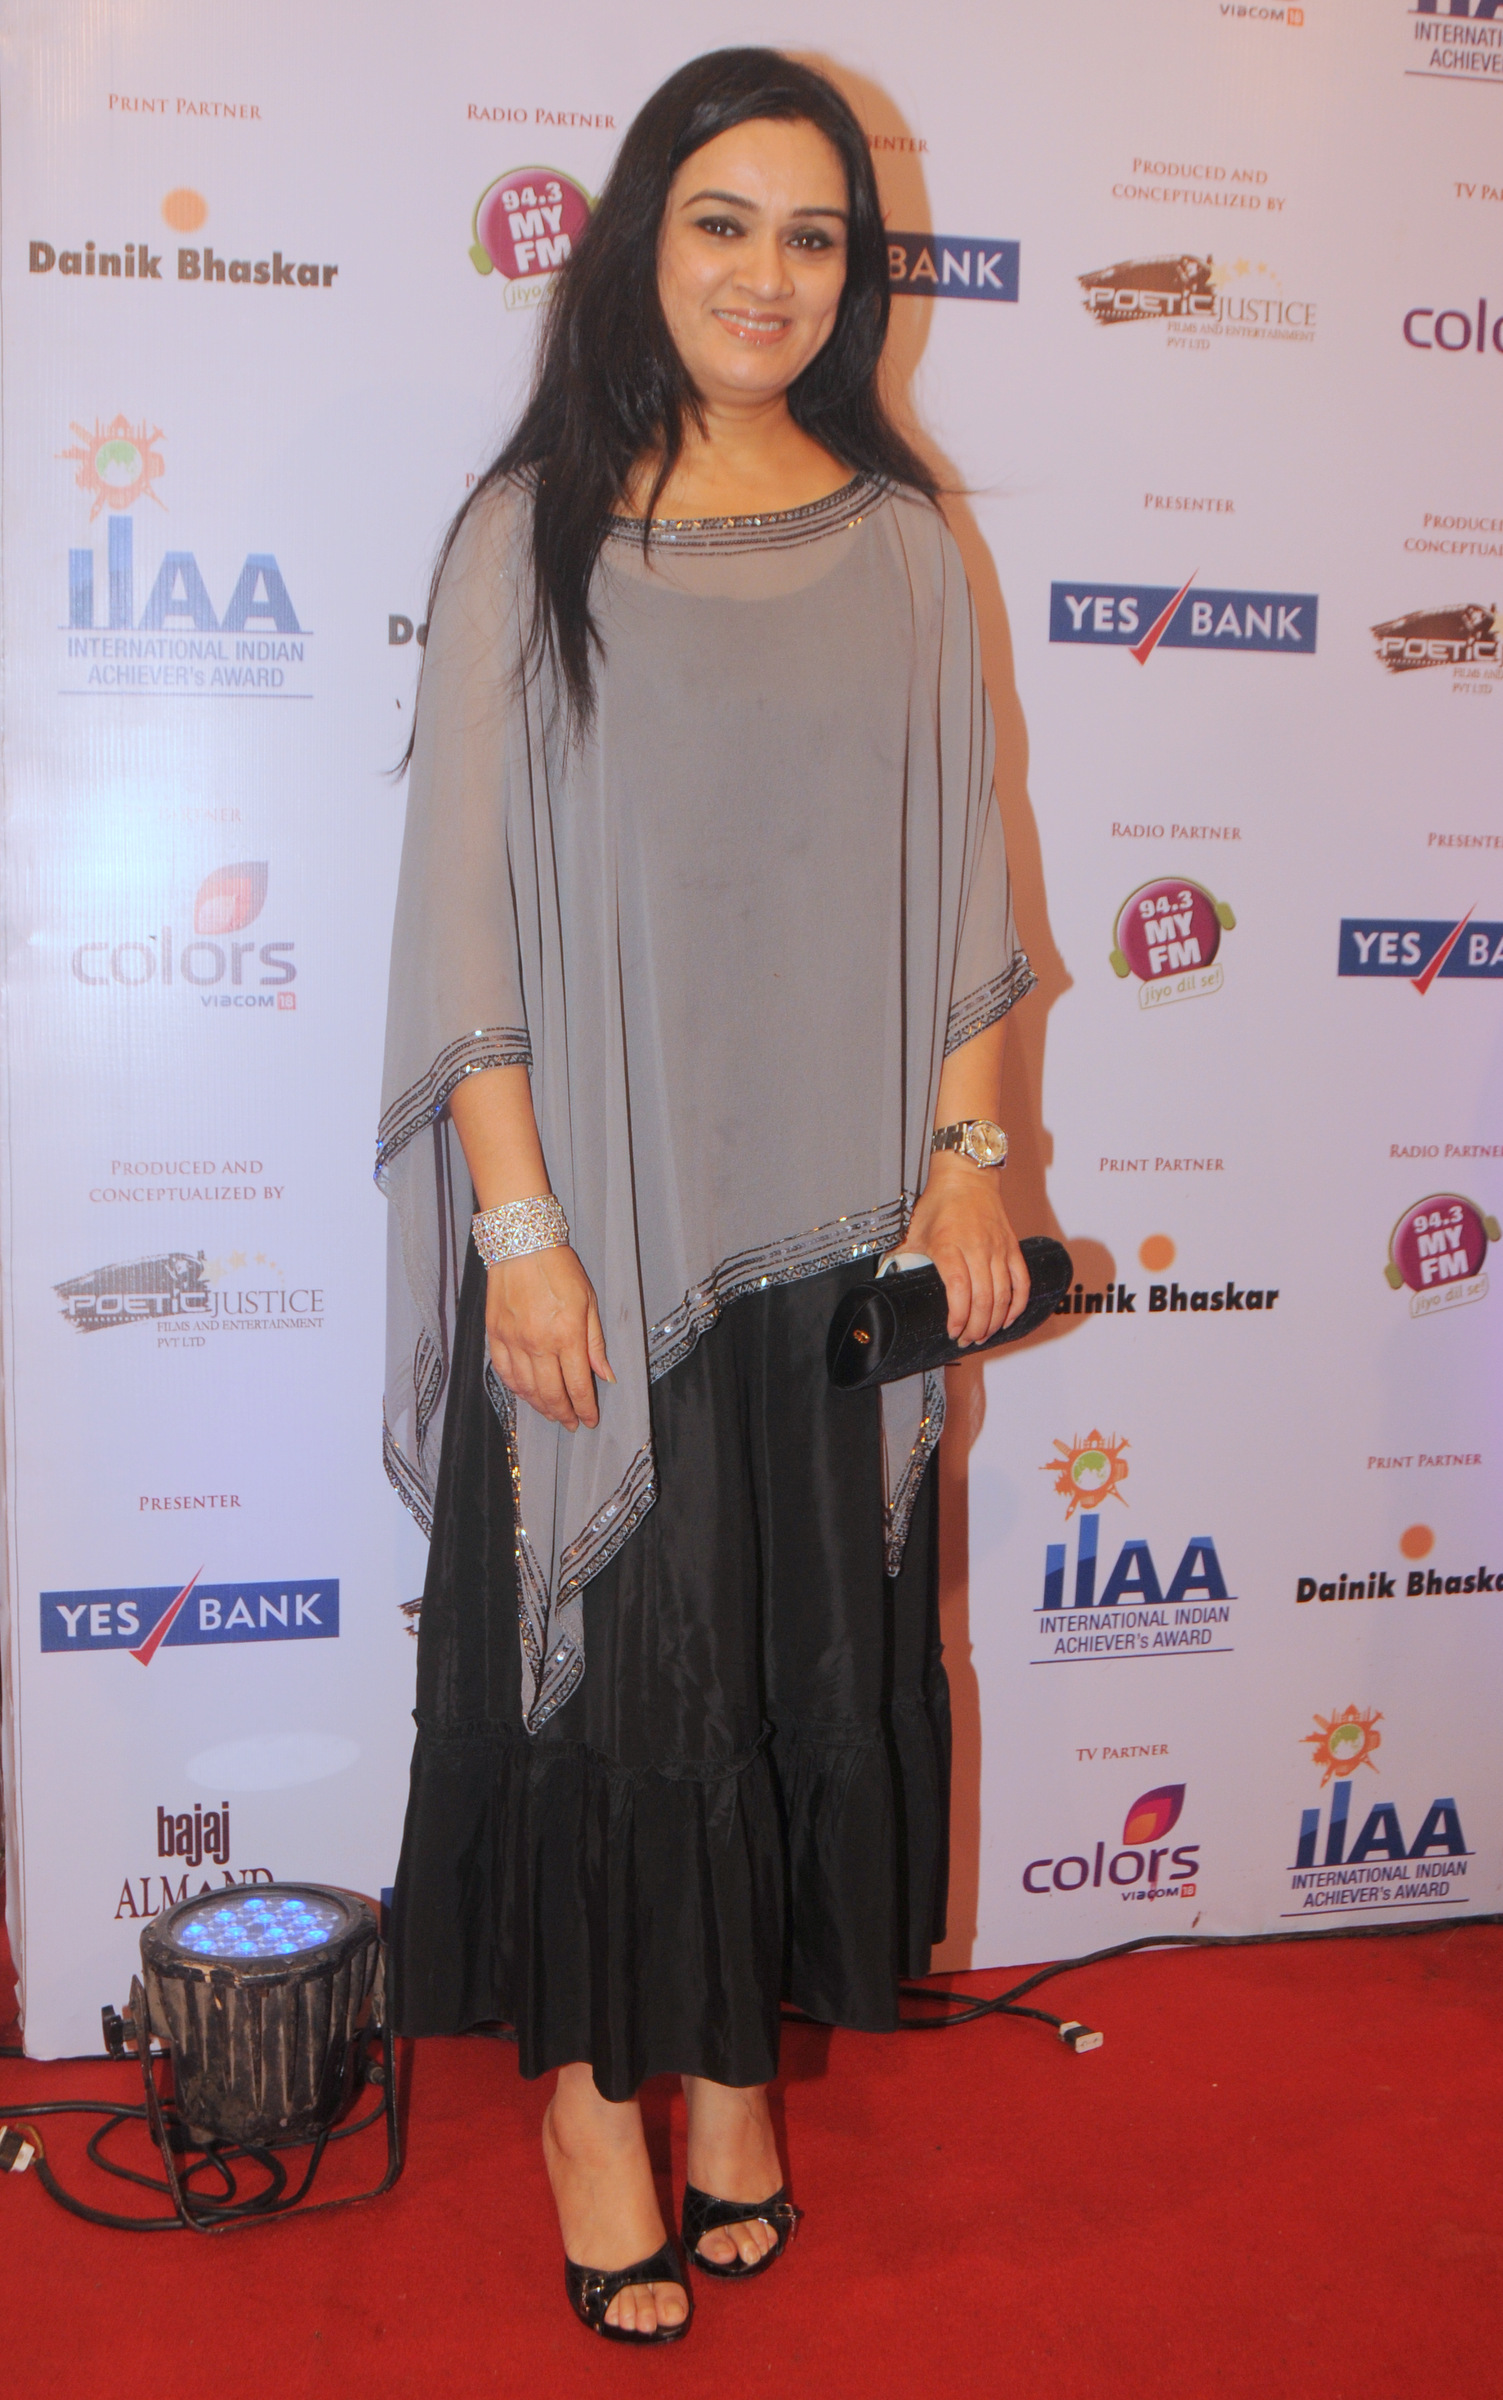 YES BANK Presents International Indian Achiever Award 2014